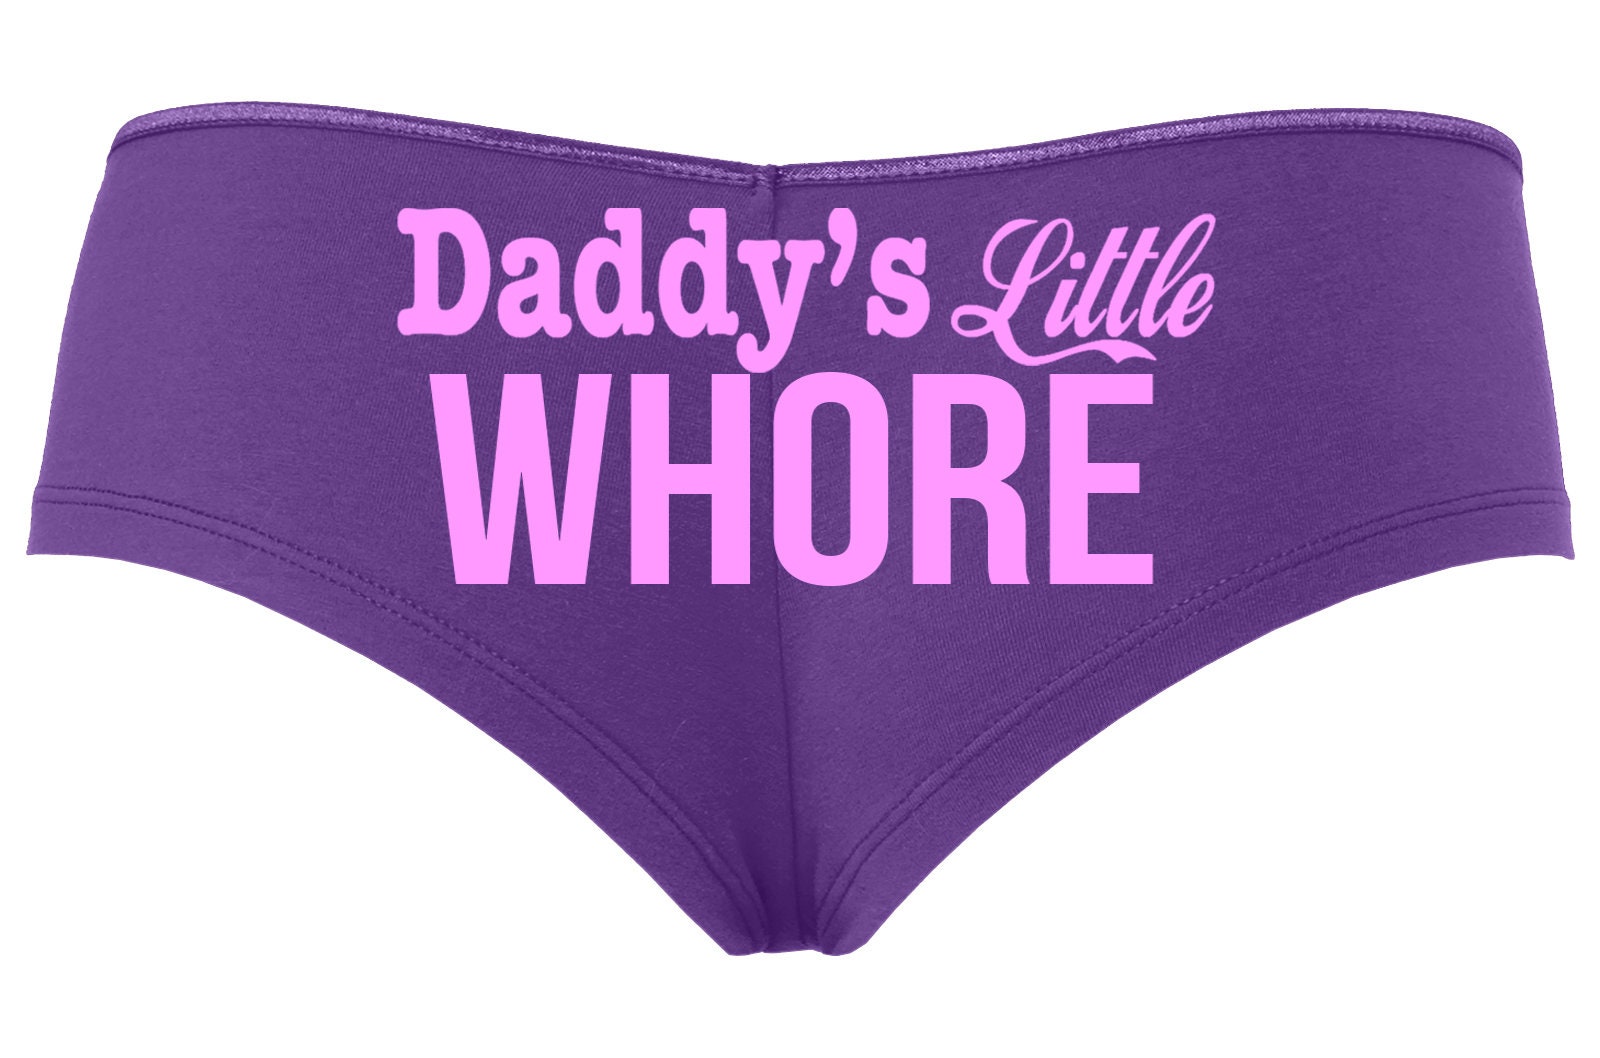 DADDYS LITTLE WHORE Owned Slave Purple Boy Short Panties Color Options